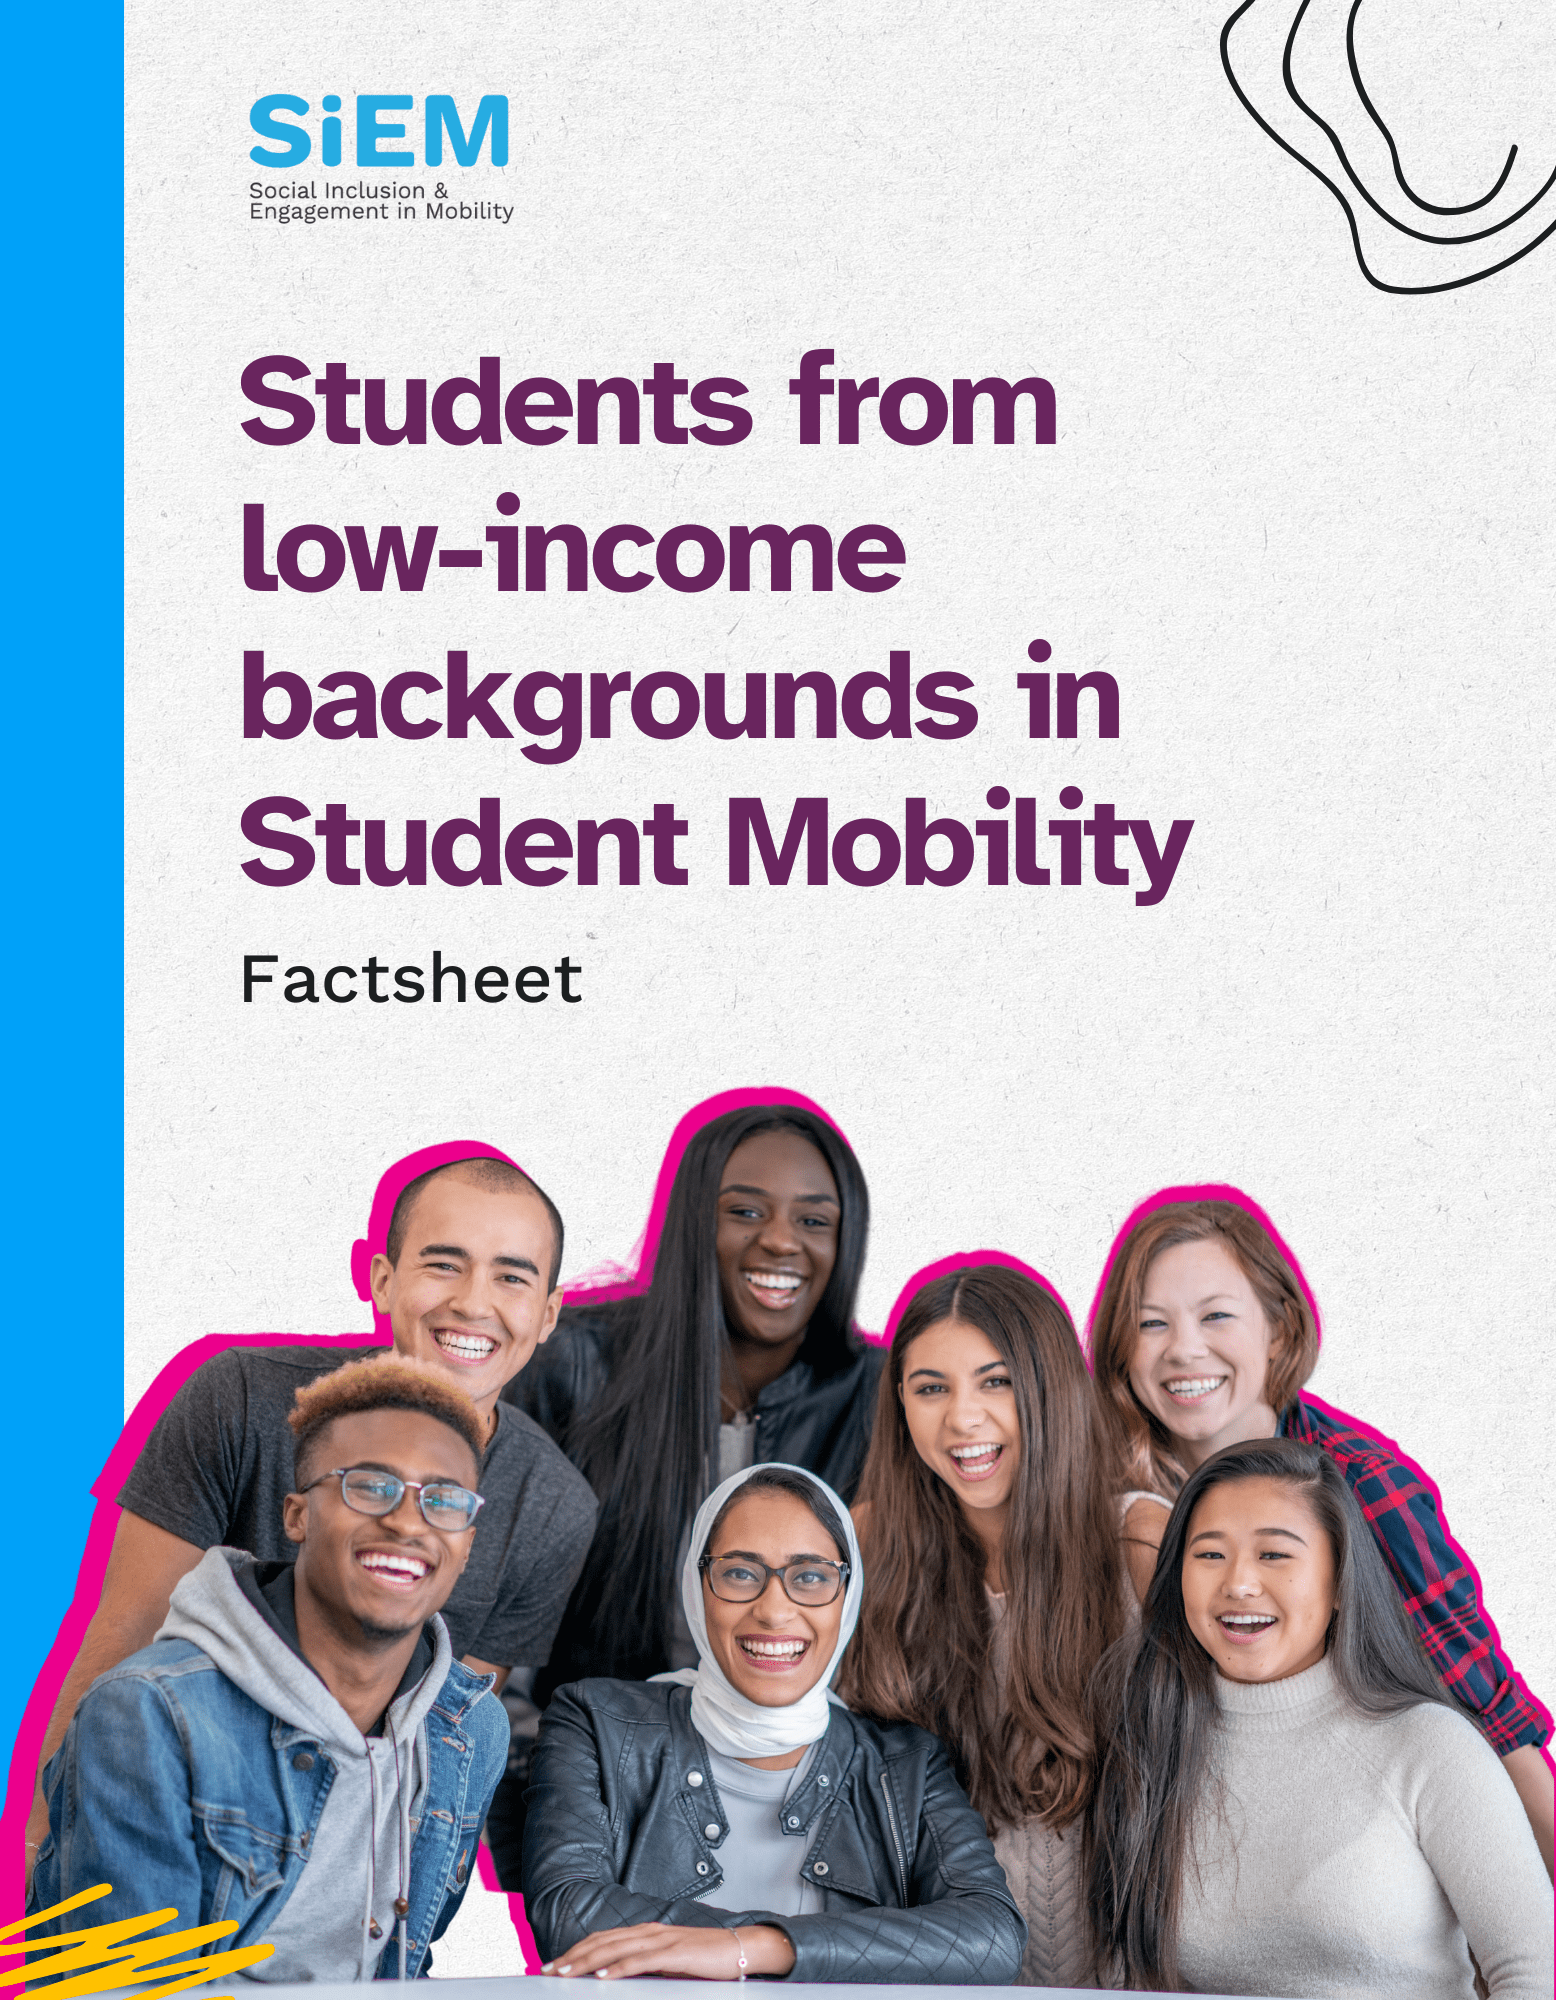 Factsheet - Students from low-income backgrounds in Student Mobility